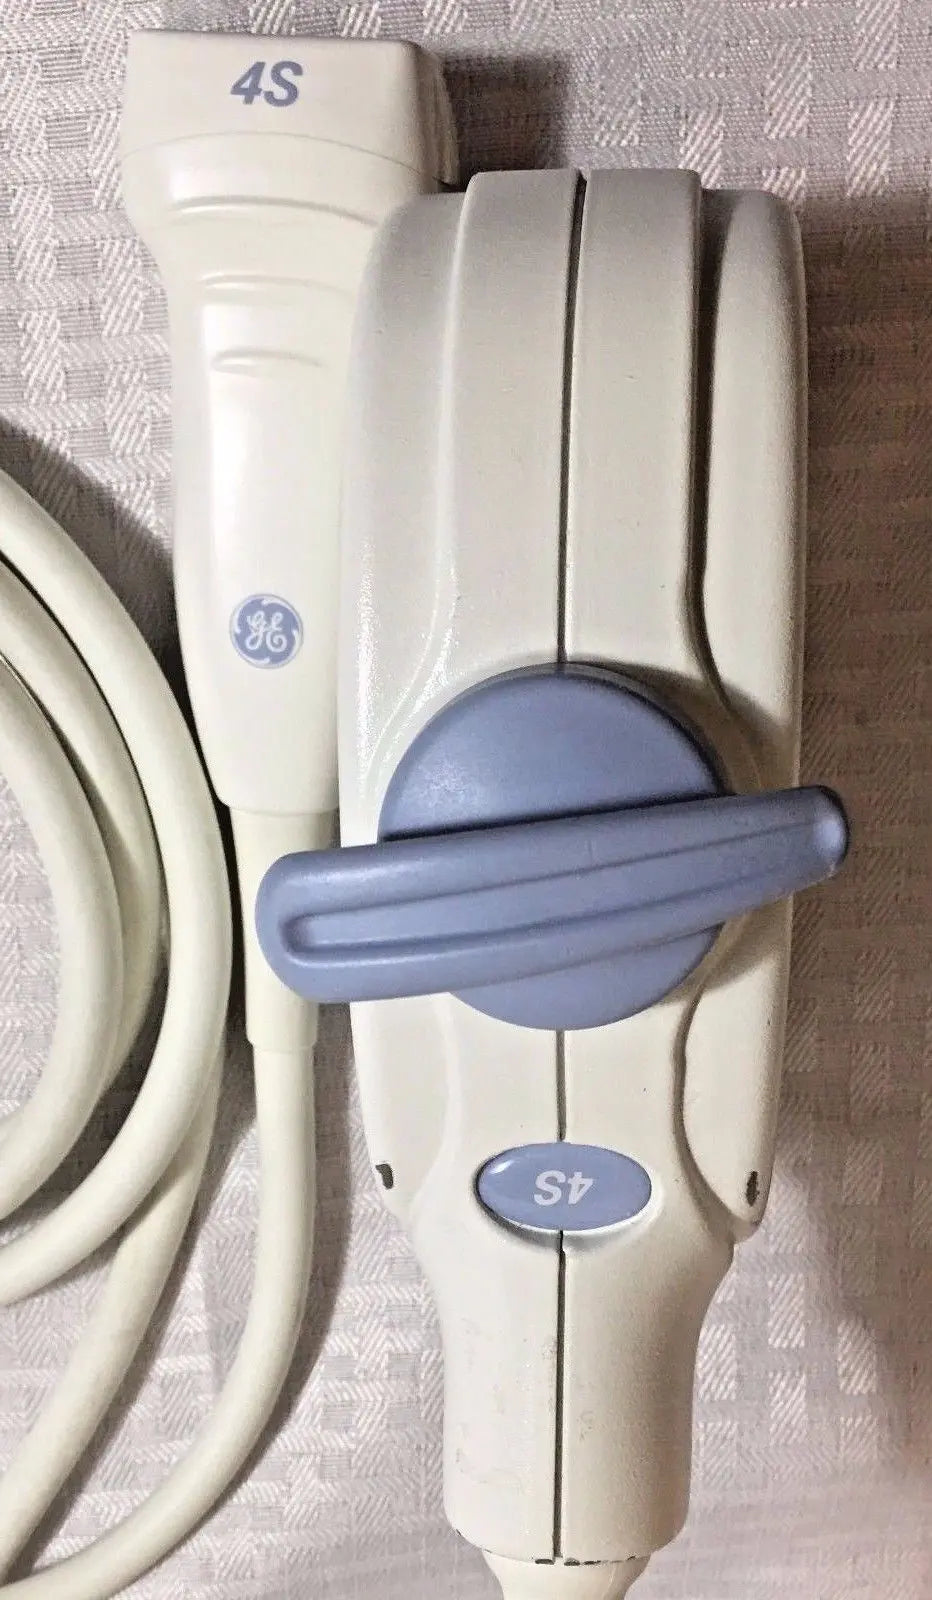 GE's 4S Probe for Logiq and Vivid series Ultrasound - "Excellent Condition" DIAGNOSTIC ULTRASOUND MACHINES FOR SALE